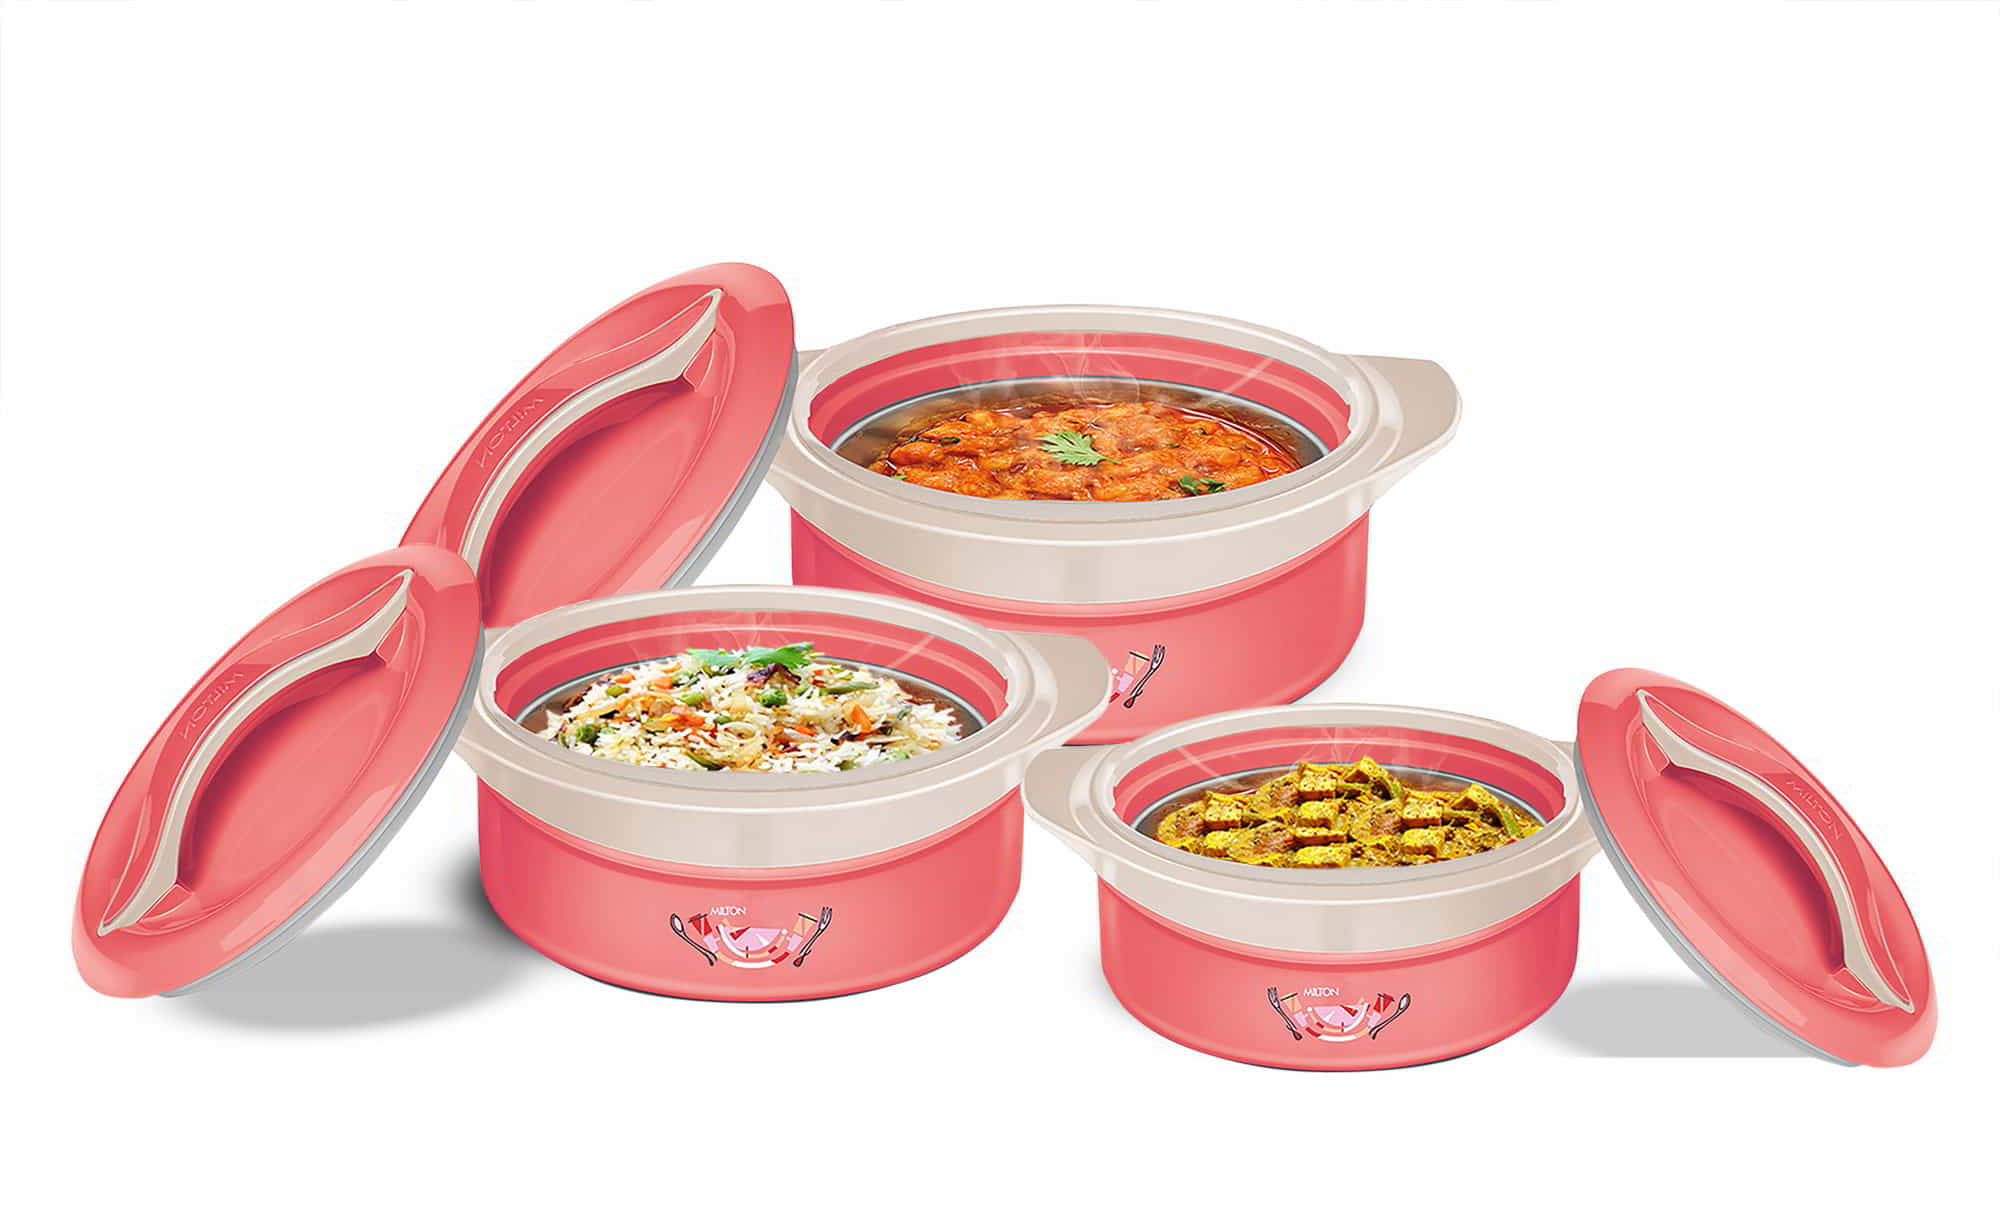 MILTON Galaxia Gift Set Silver Pack of 3 Serve Casserole Set Price in India  - Buy MILTON Galaxia Gift Set Silver Pack of 3 Serve Casserole Set online  at Flipkart.com